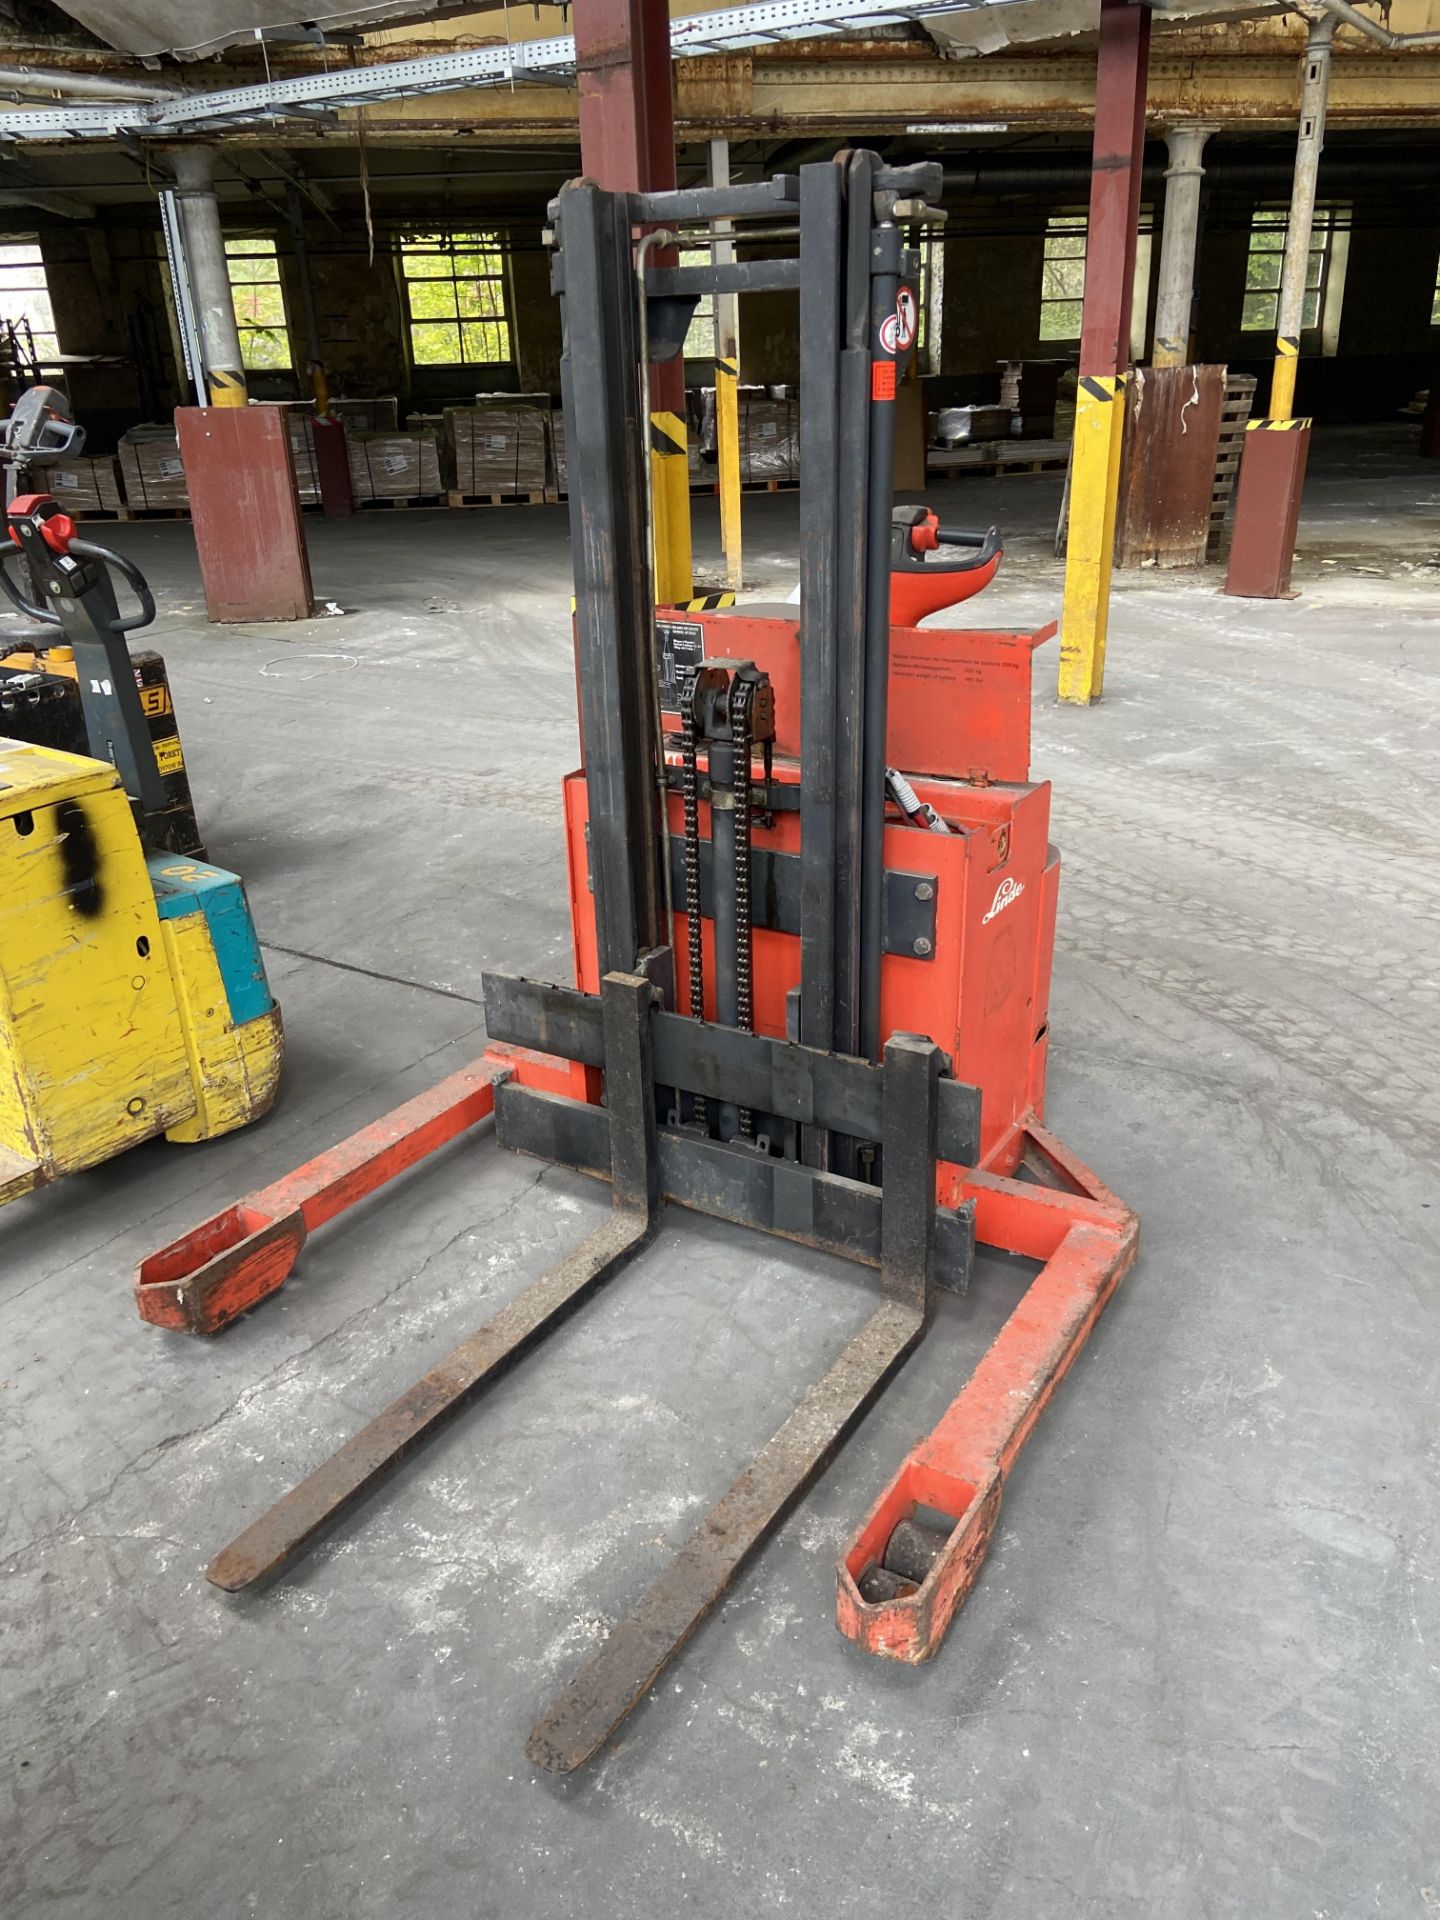 Lansing Linde L 16 AS 1600kg cap. Electric Pedestrian Operated Fork Lift Truck, serial no. - Image 2 of 4